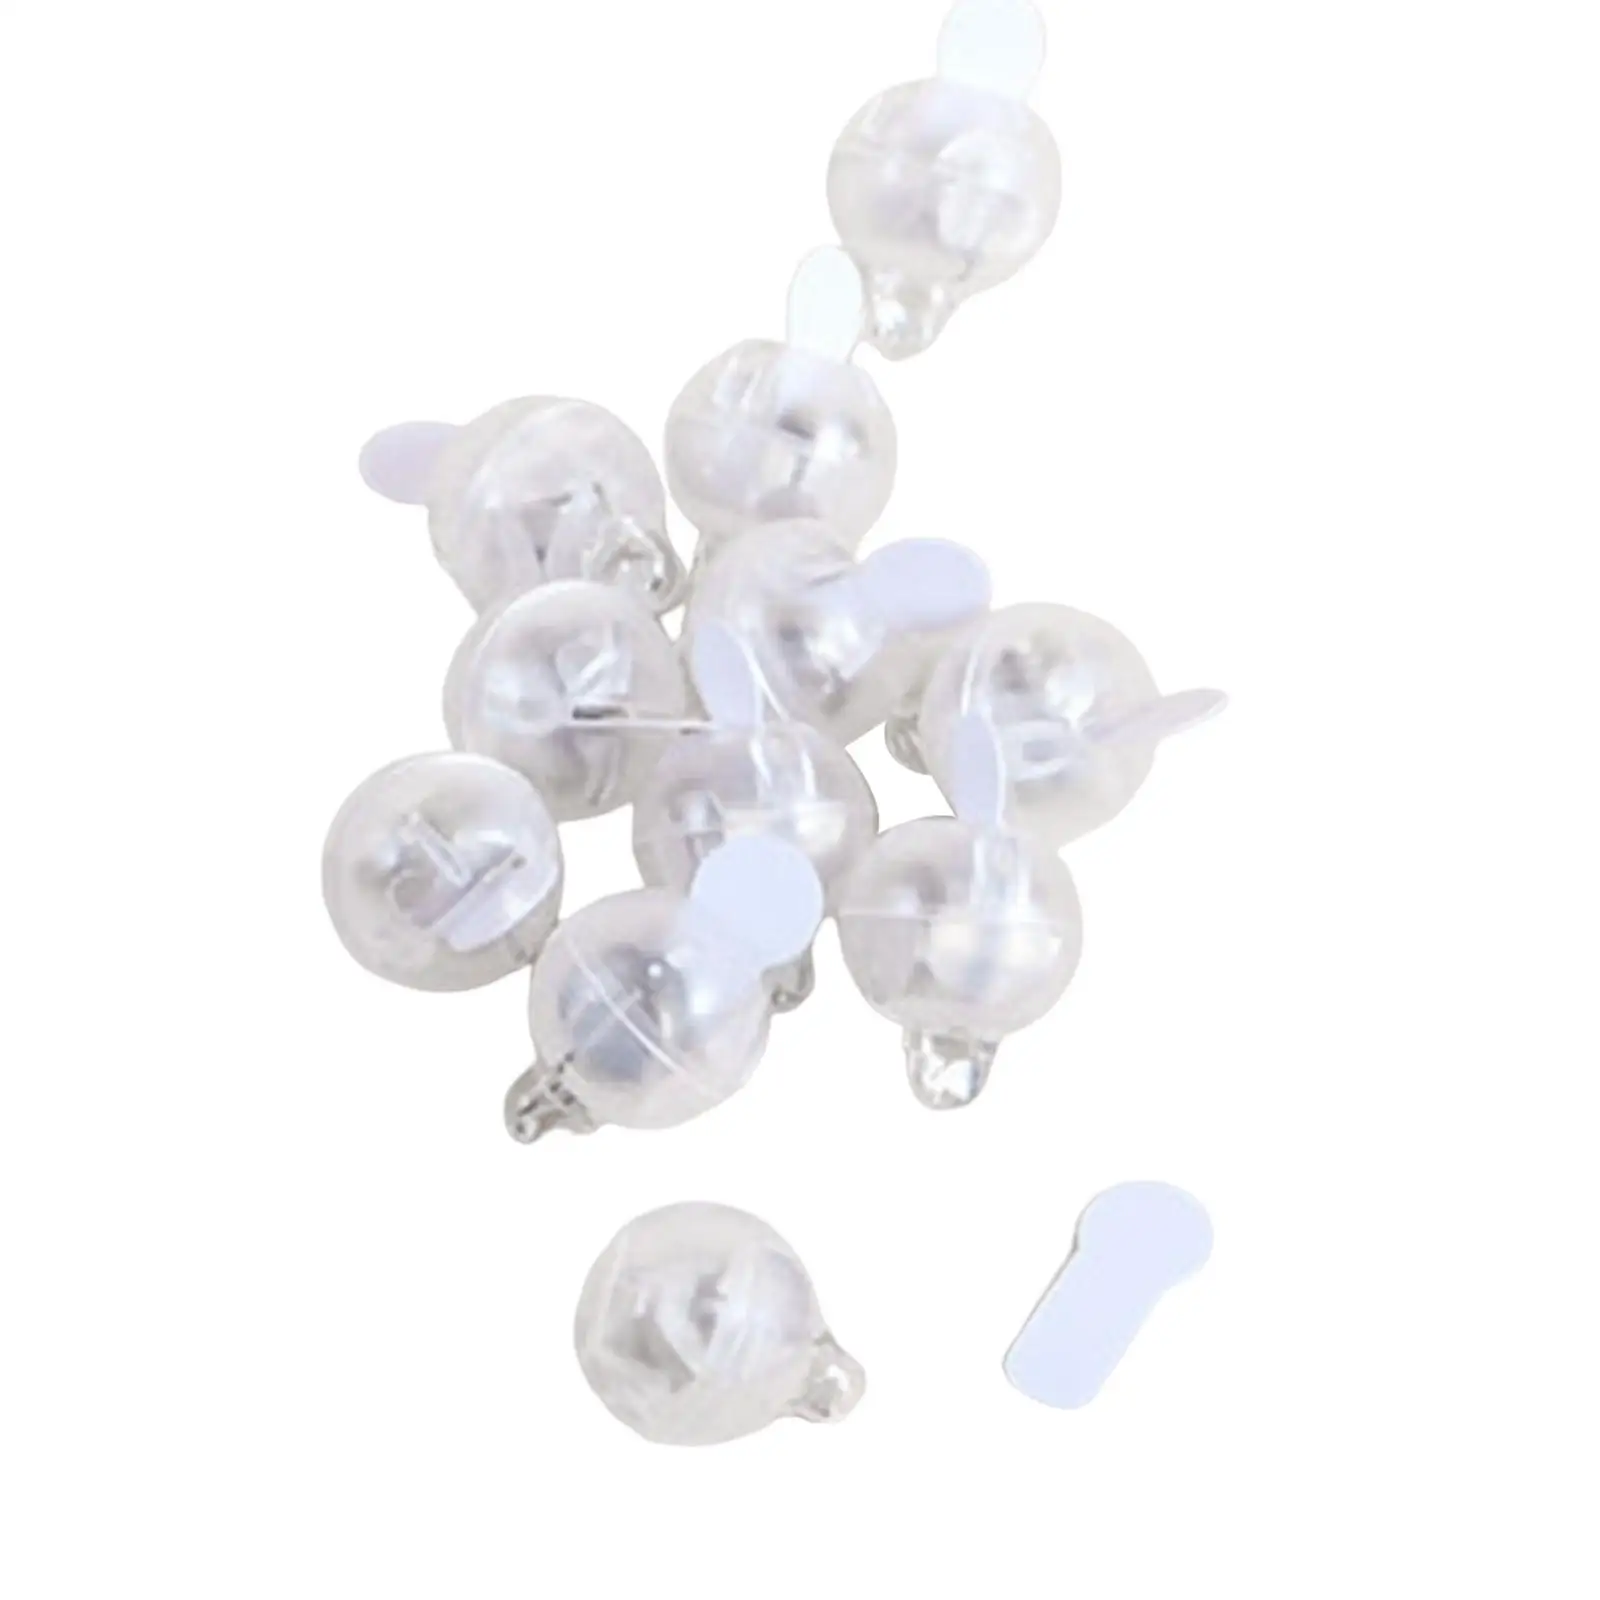 11x Ball Lamp Replacement Round Mini Small White LED Balls Light for Outdoor Birthday Party Balloon Headwear Decorations